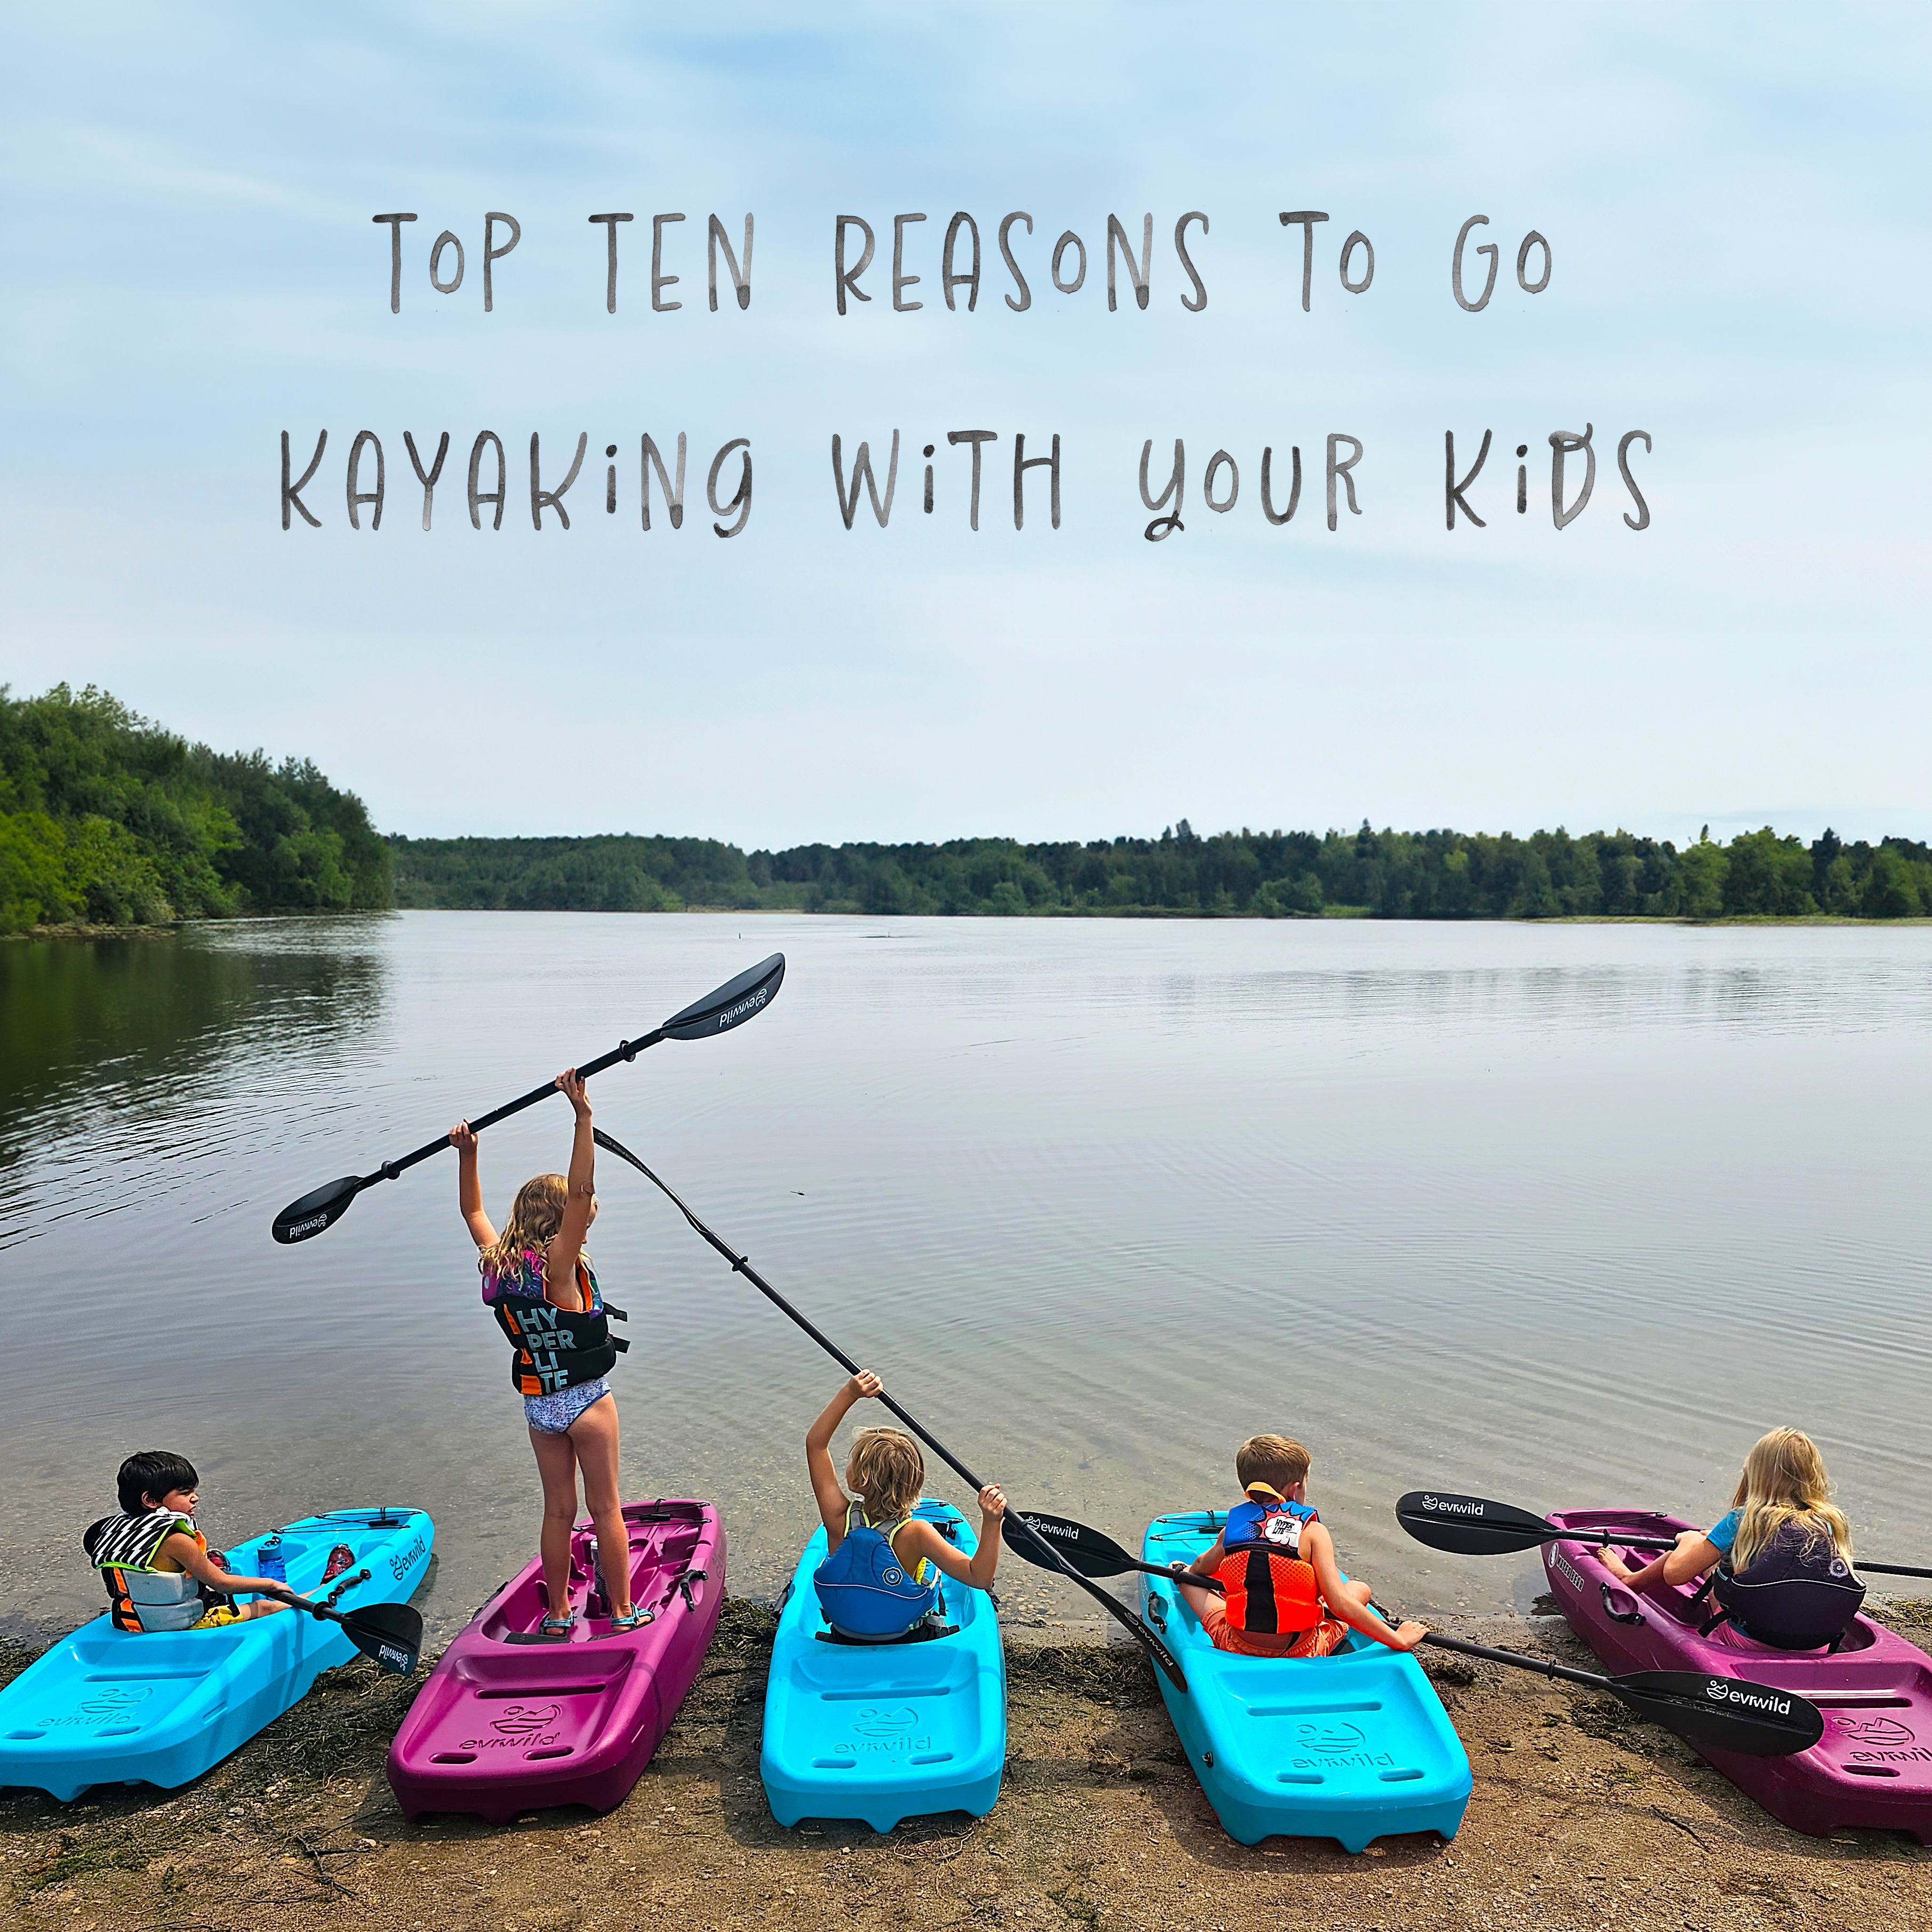 Top Ten Reasons To Go Kayaking With Your Kids